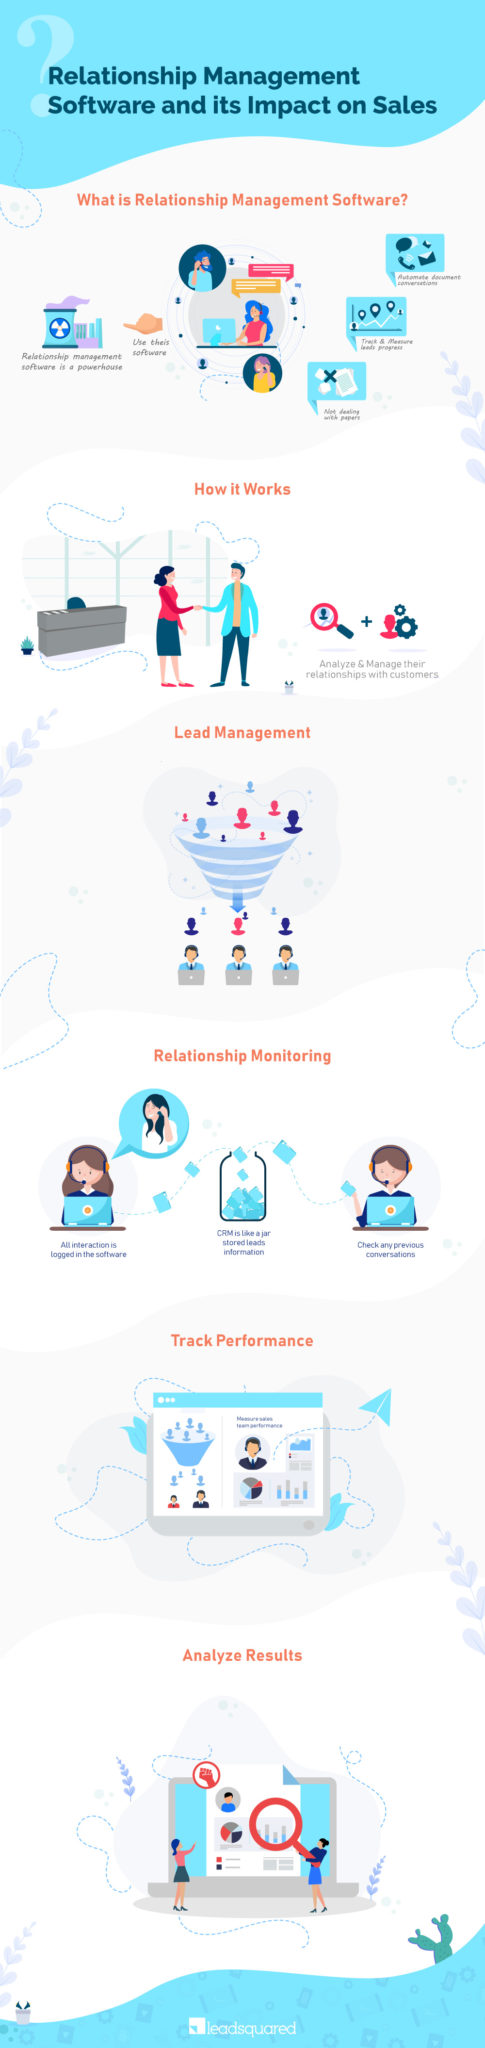 relationship management software - infographic